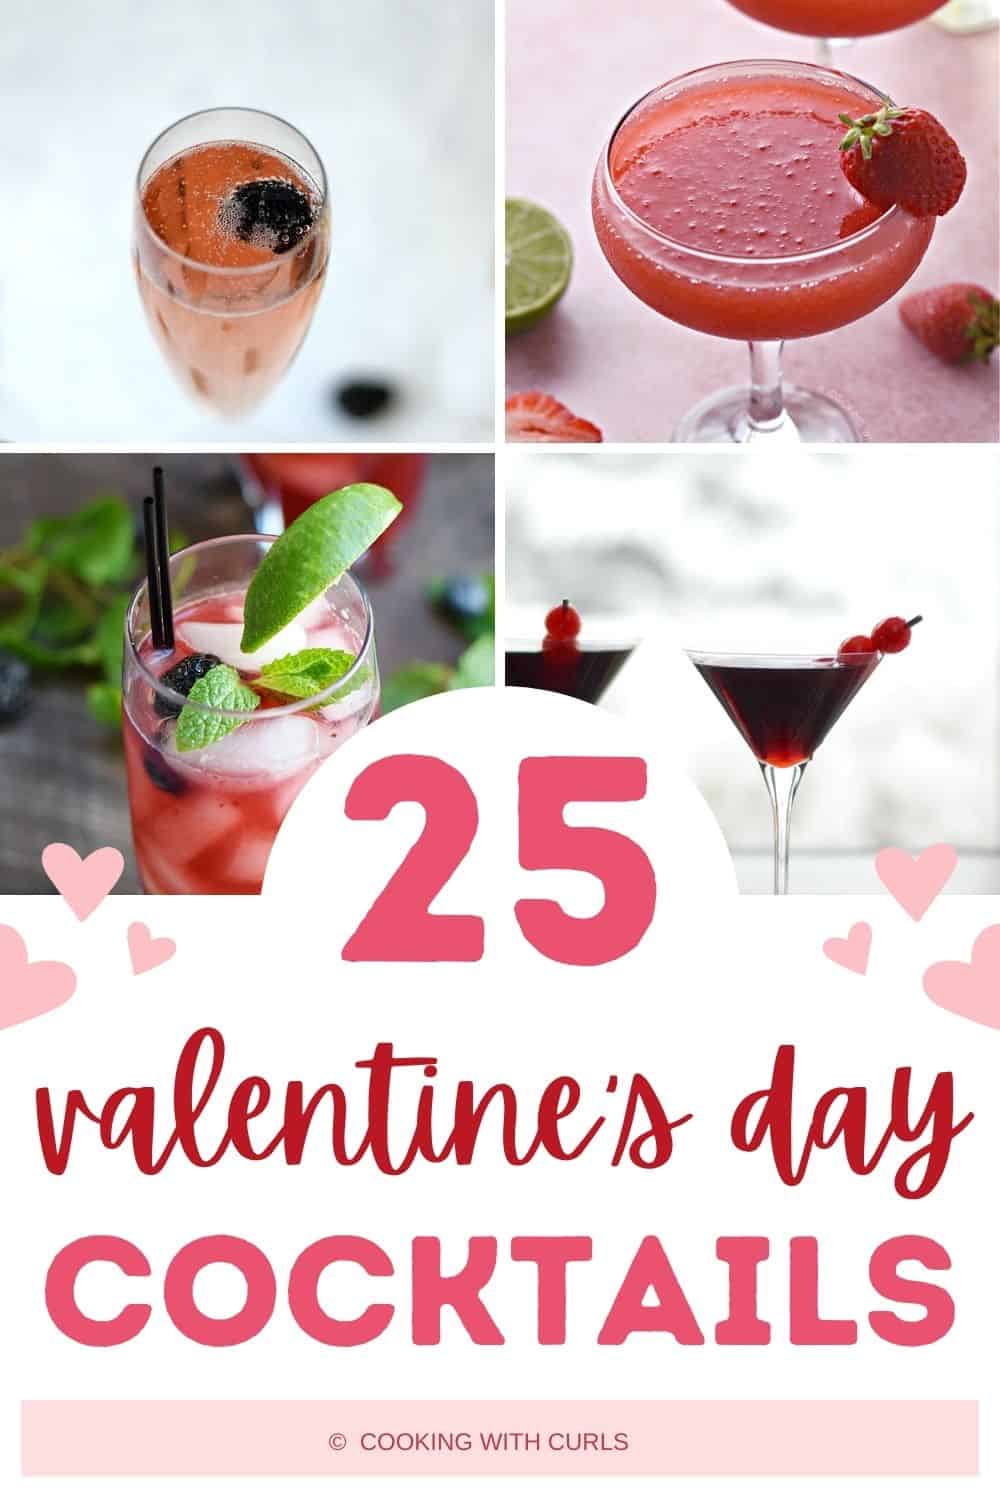 A graphic image with four pink cocktails and 25 valentine's day cocktails written below in pink.